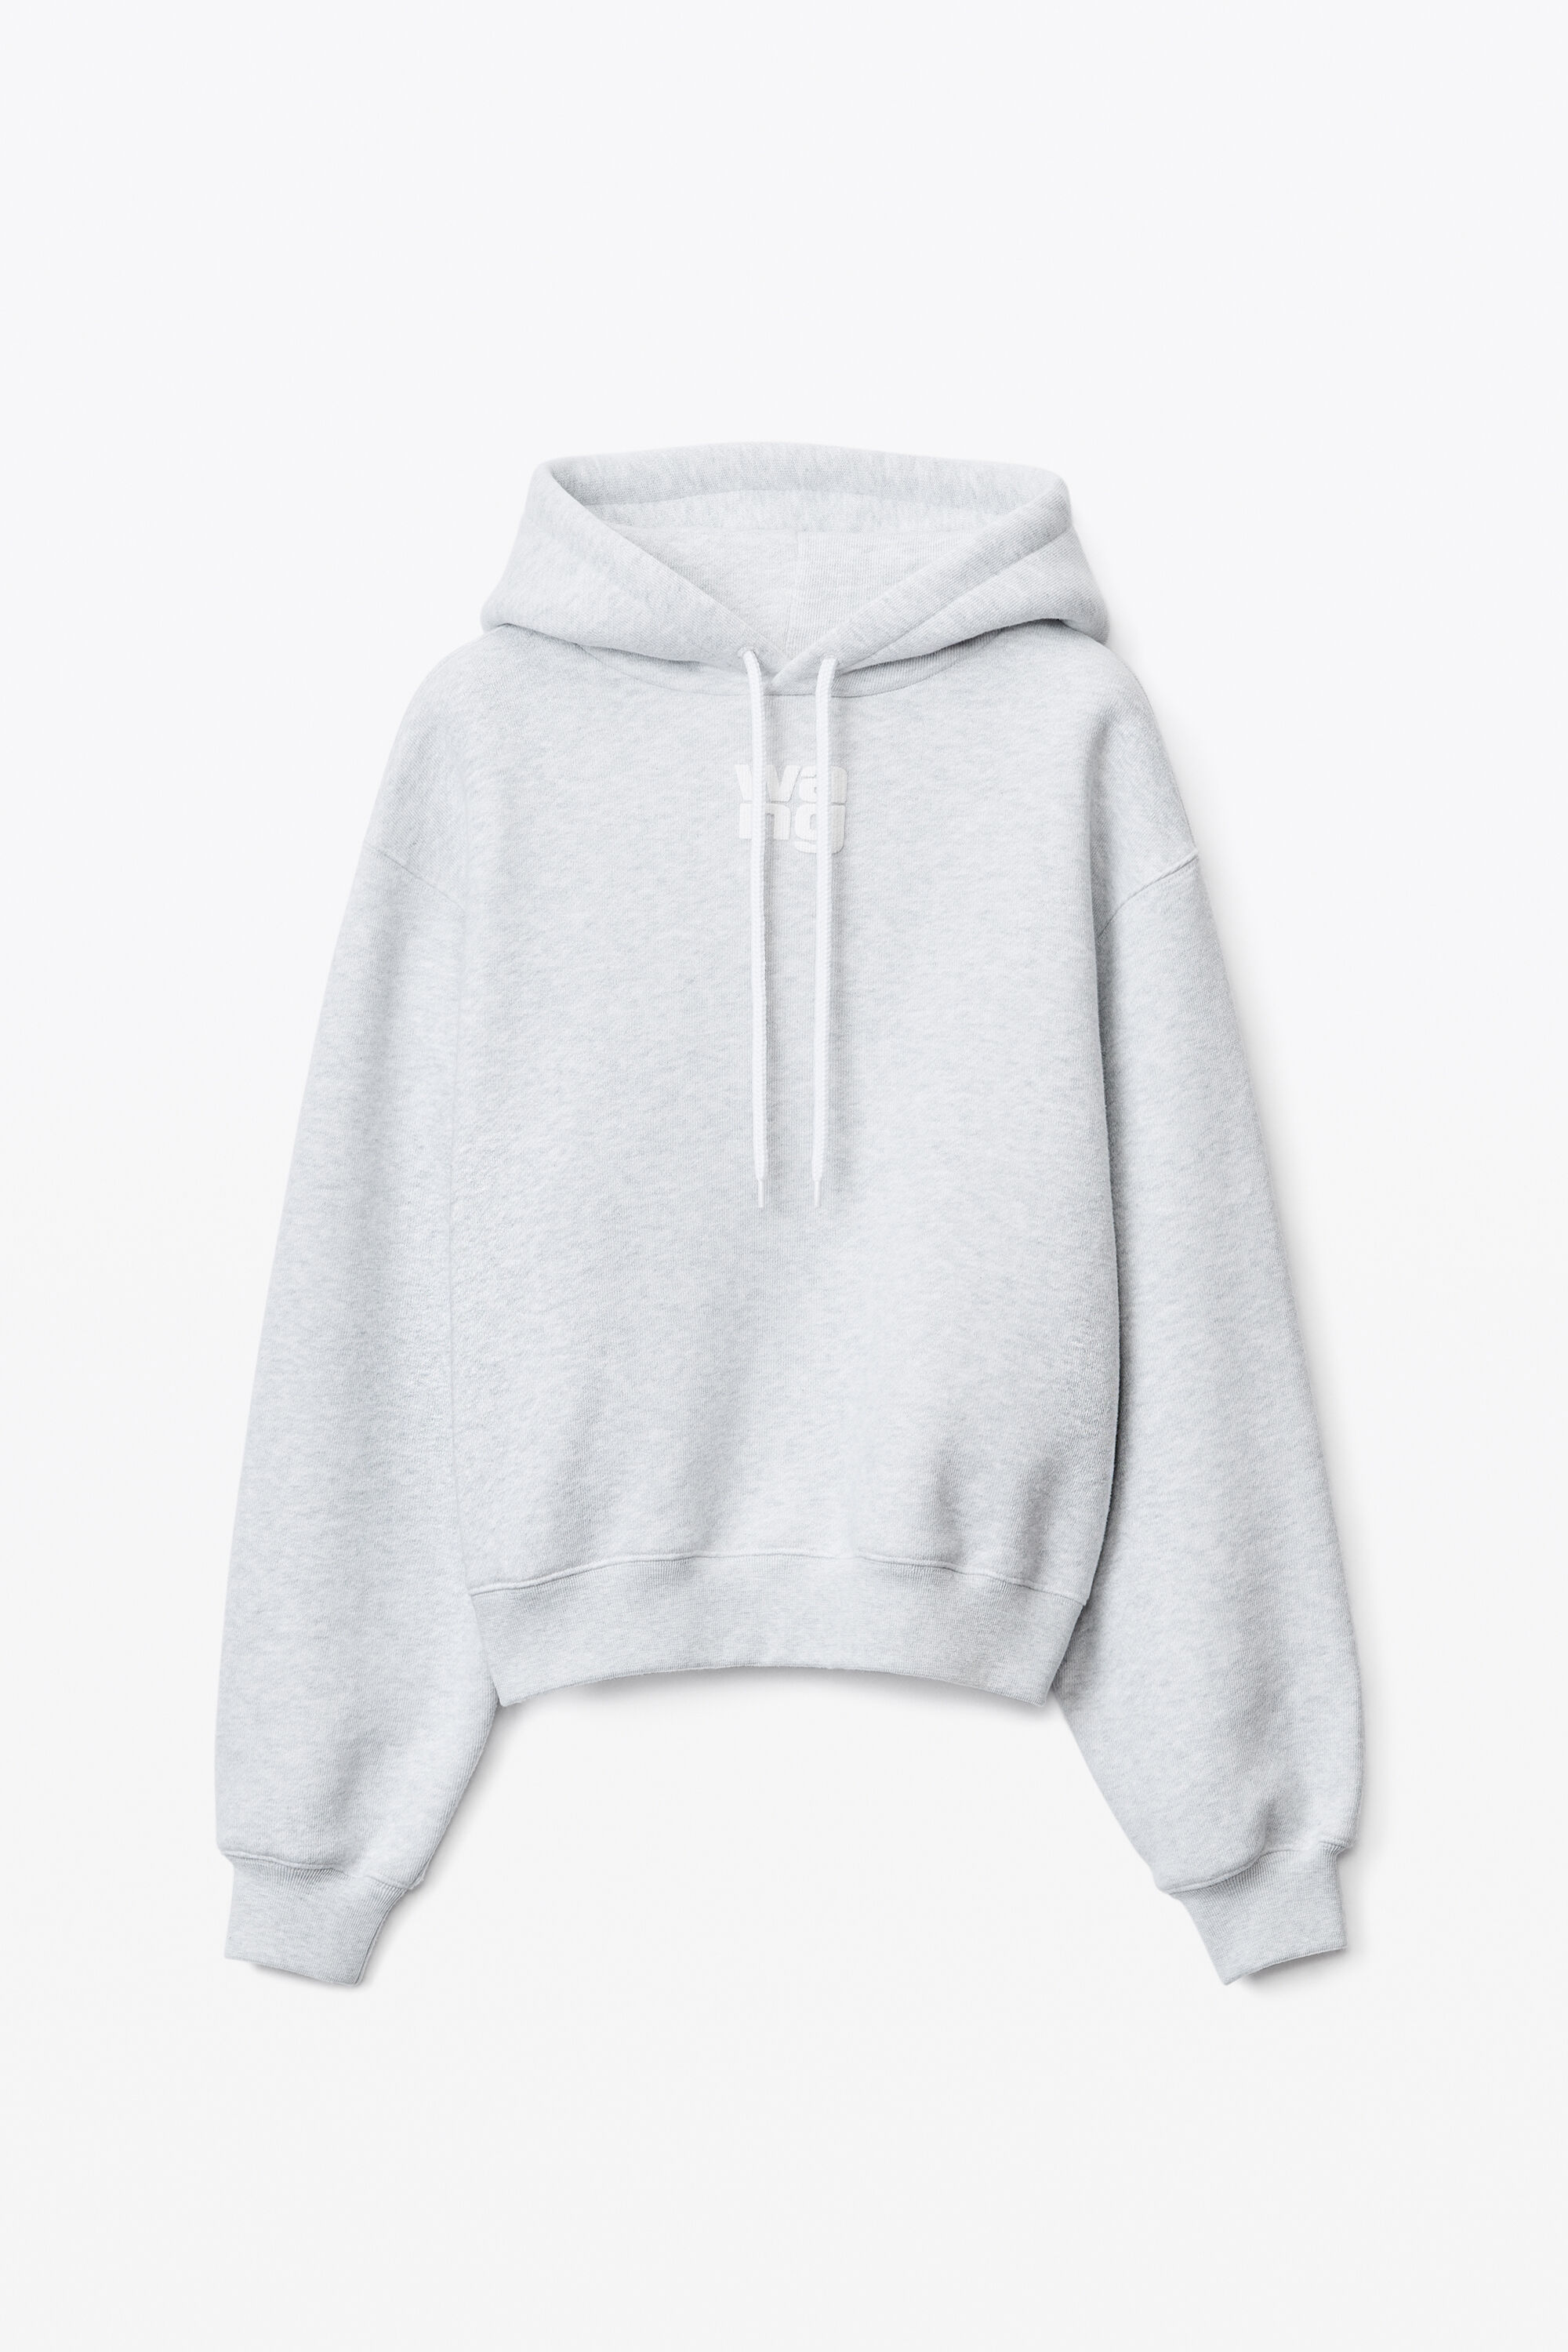 PUFF LOGO HOODIE IN STRUCTURED TERRY in LIGHT 